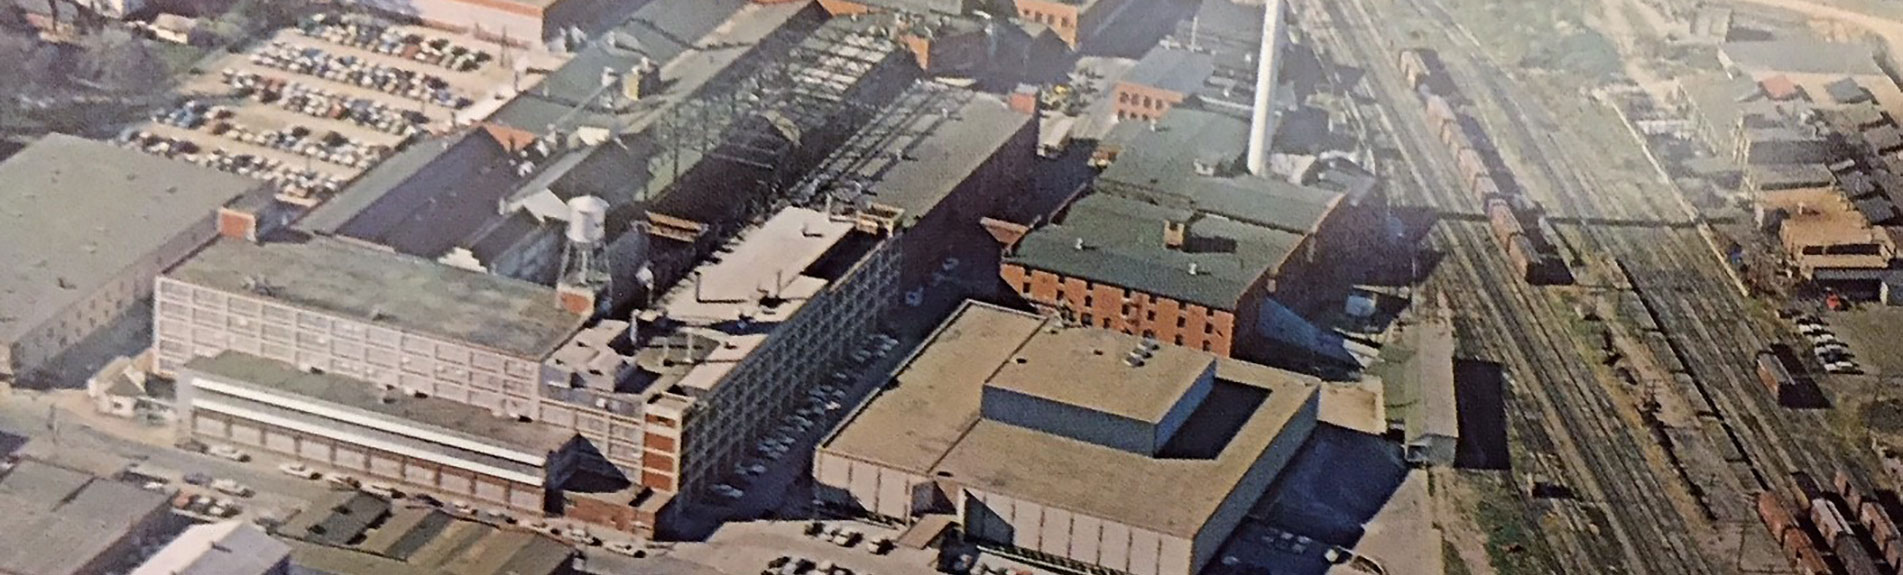 Aerial shot of the buildings in early 1900s